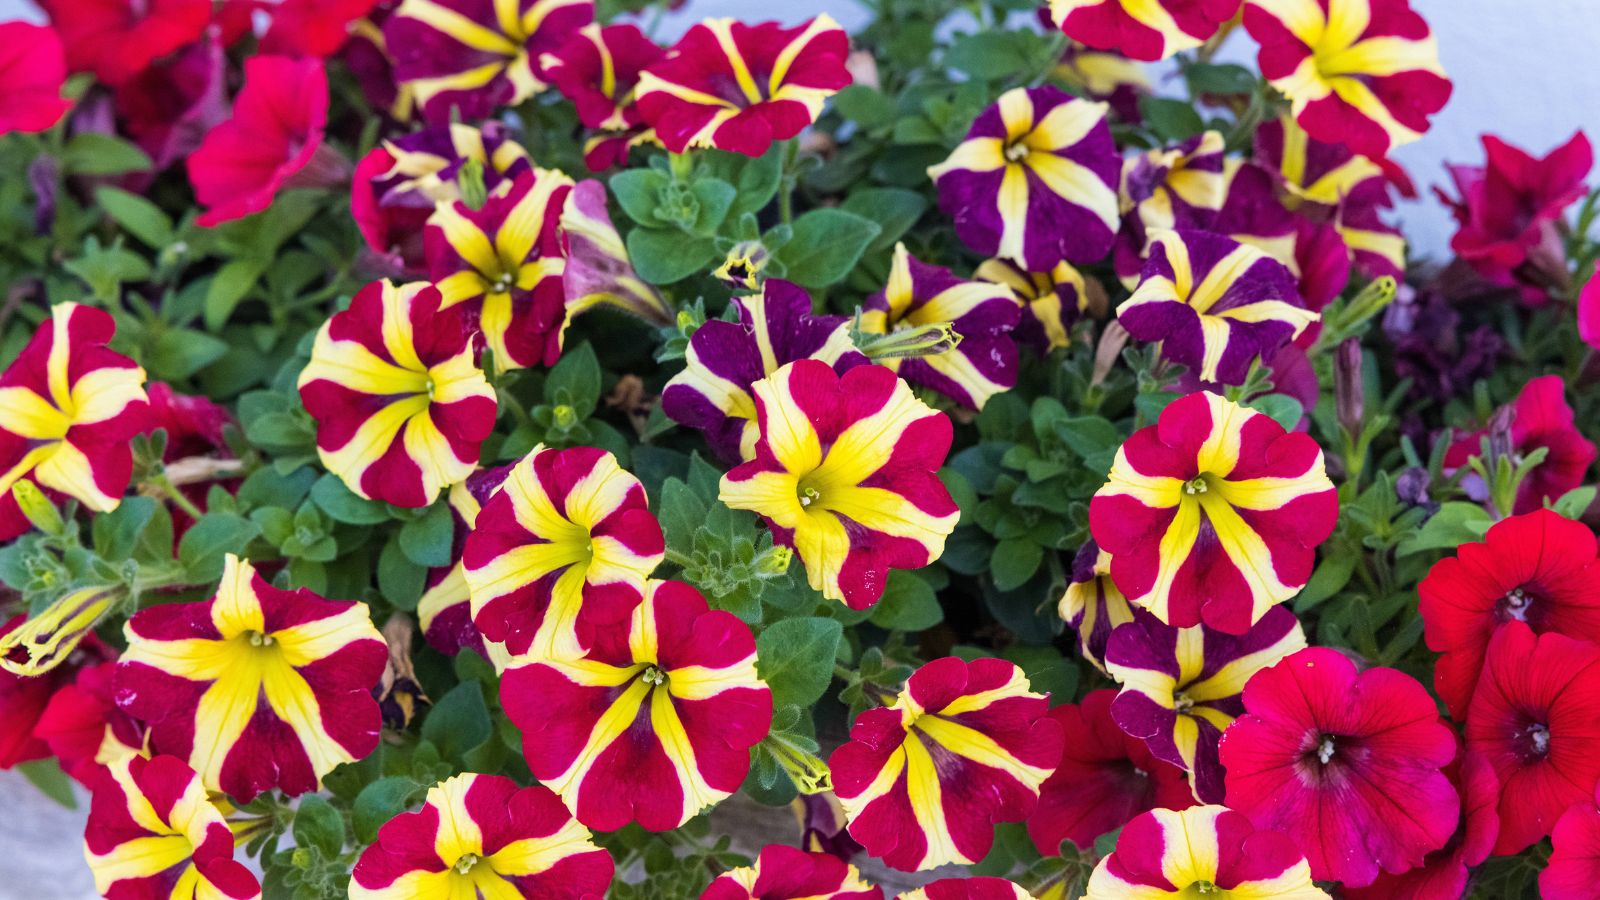 striped red and yellow petunia flowers.